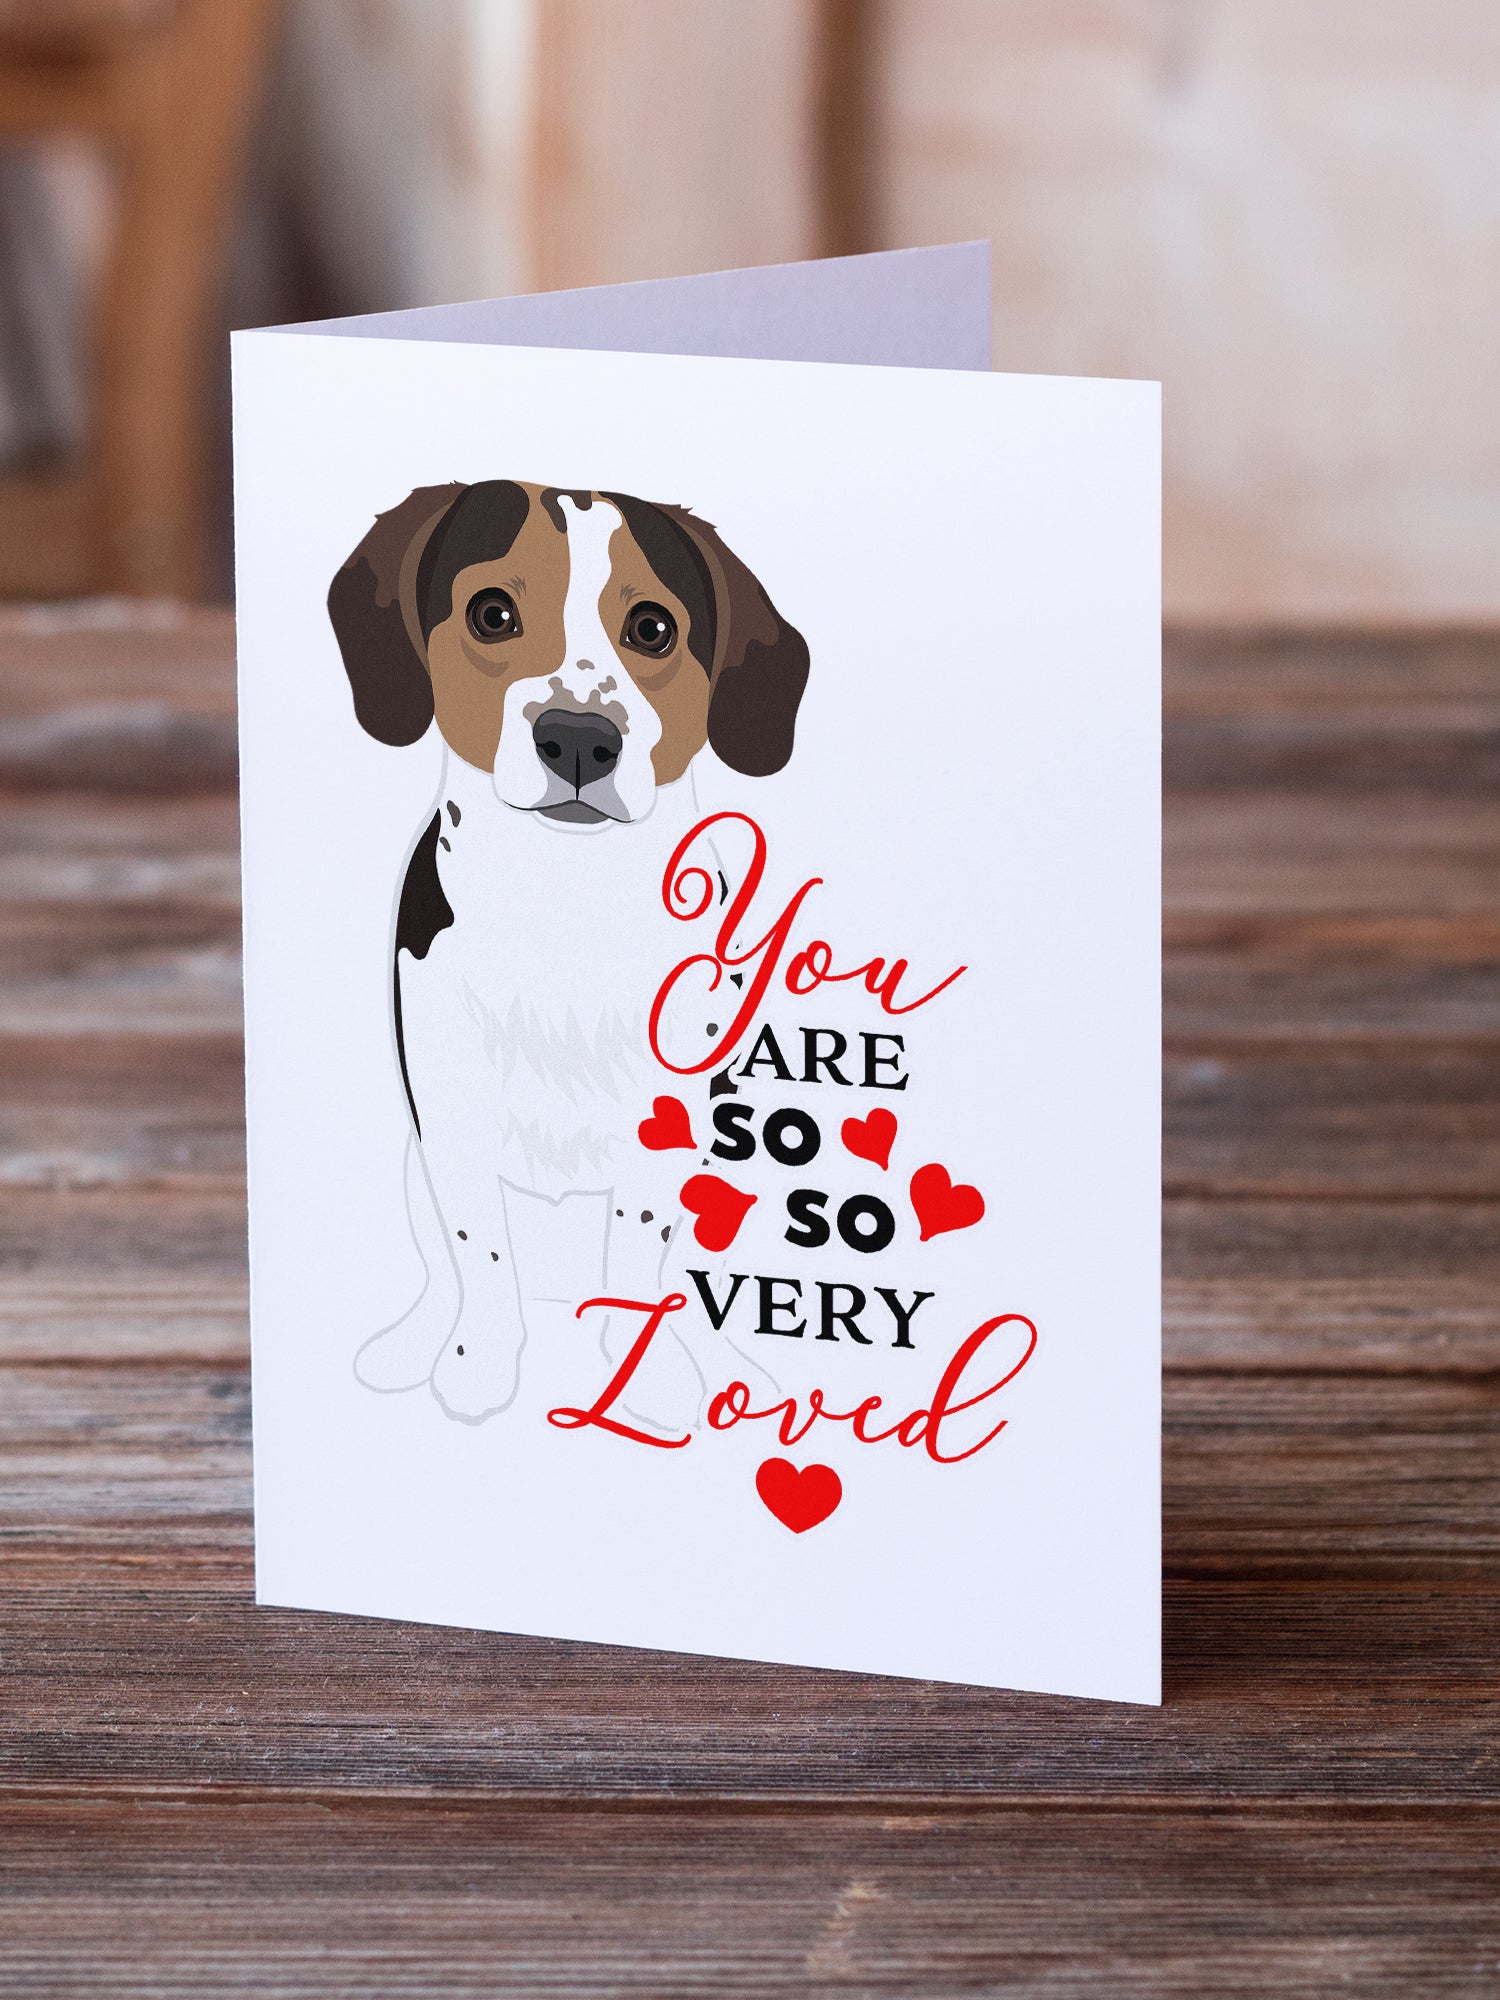 Buy this Beagle Tricolor Ticked so Loved Greeting Cards and Envelopes Pack of 8